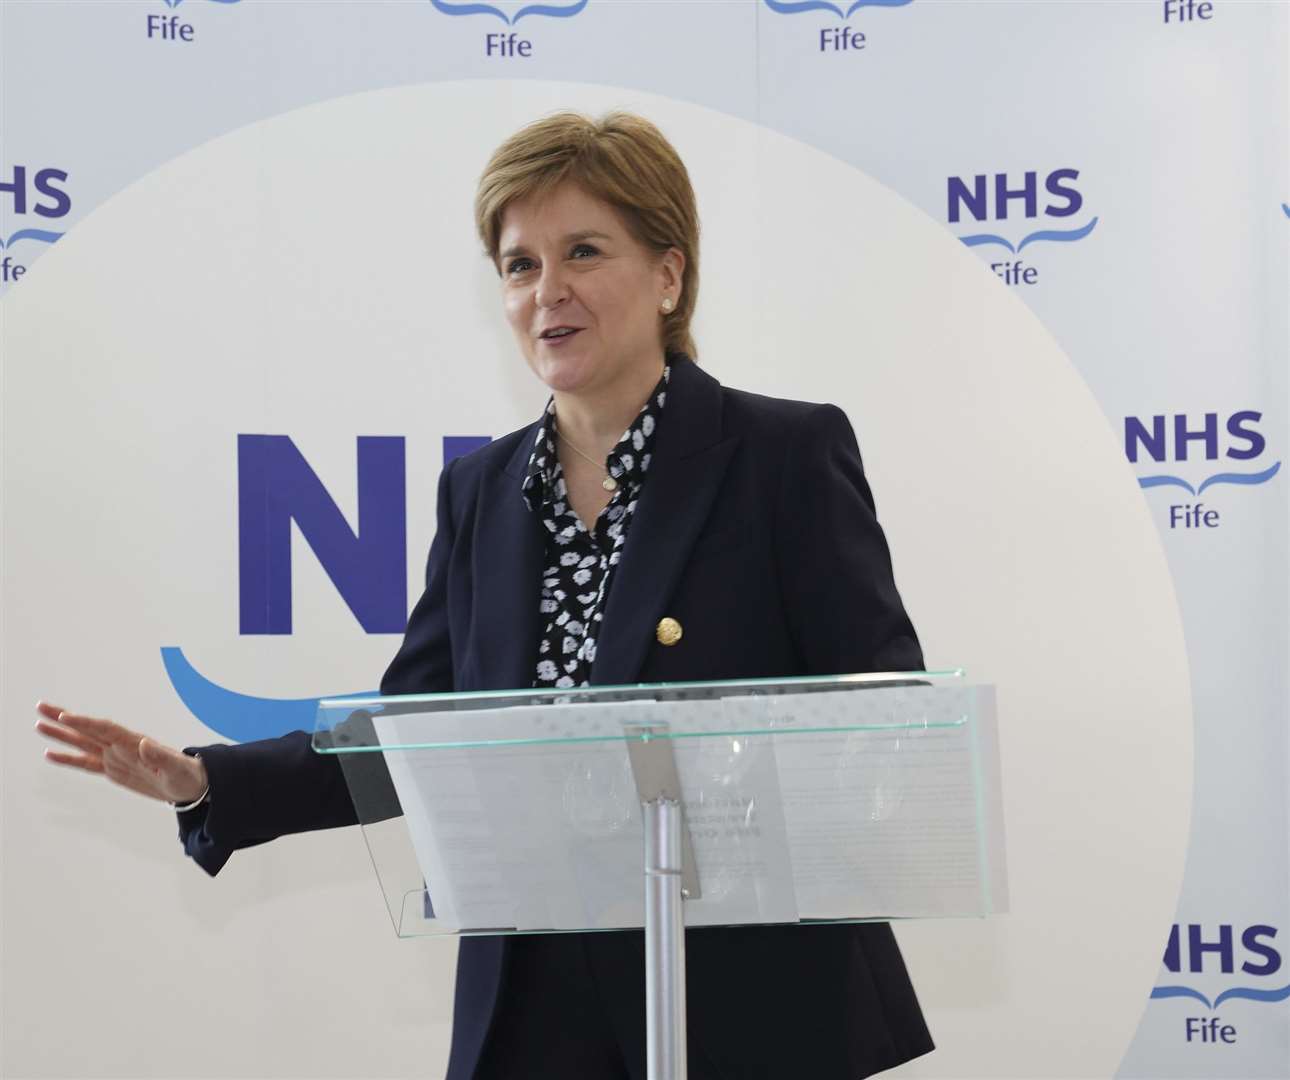 One of her last engagements was the opening of a new national treatment centre in Fife